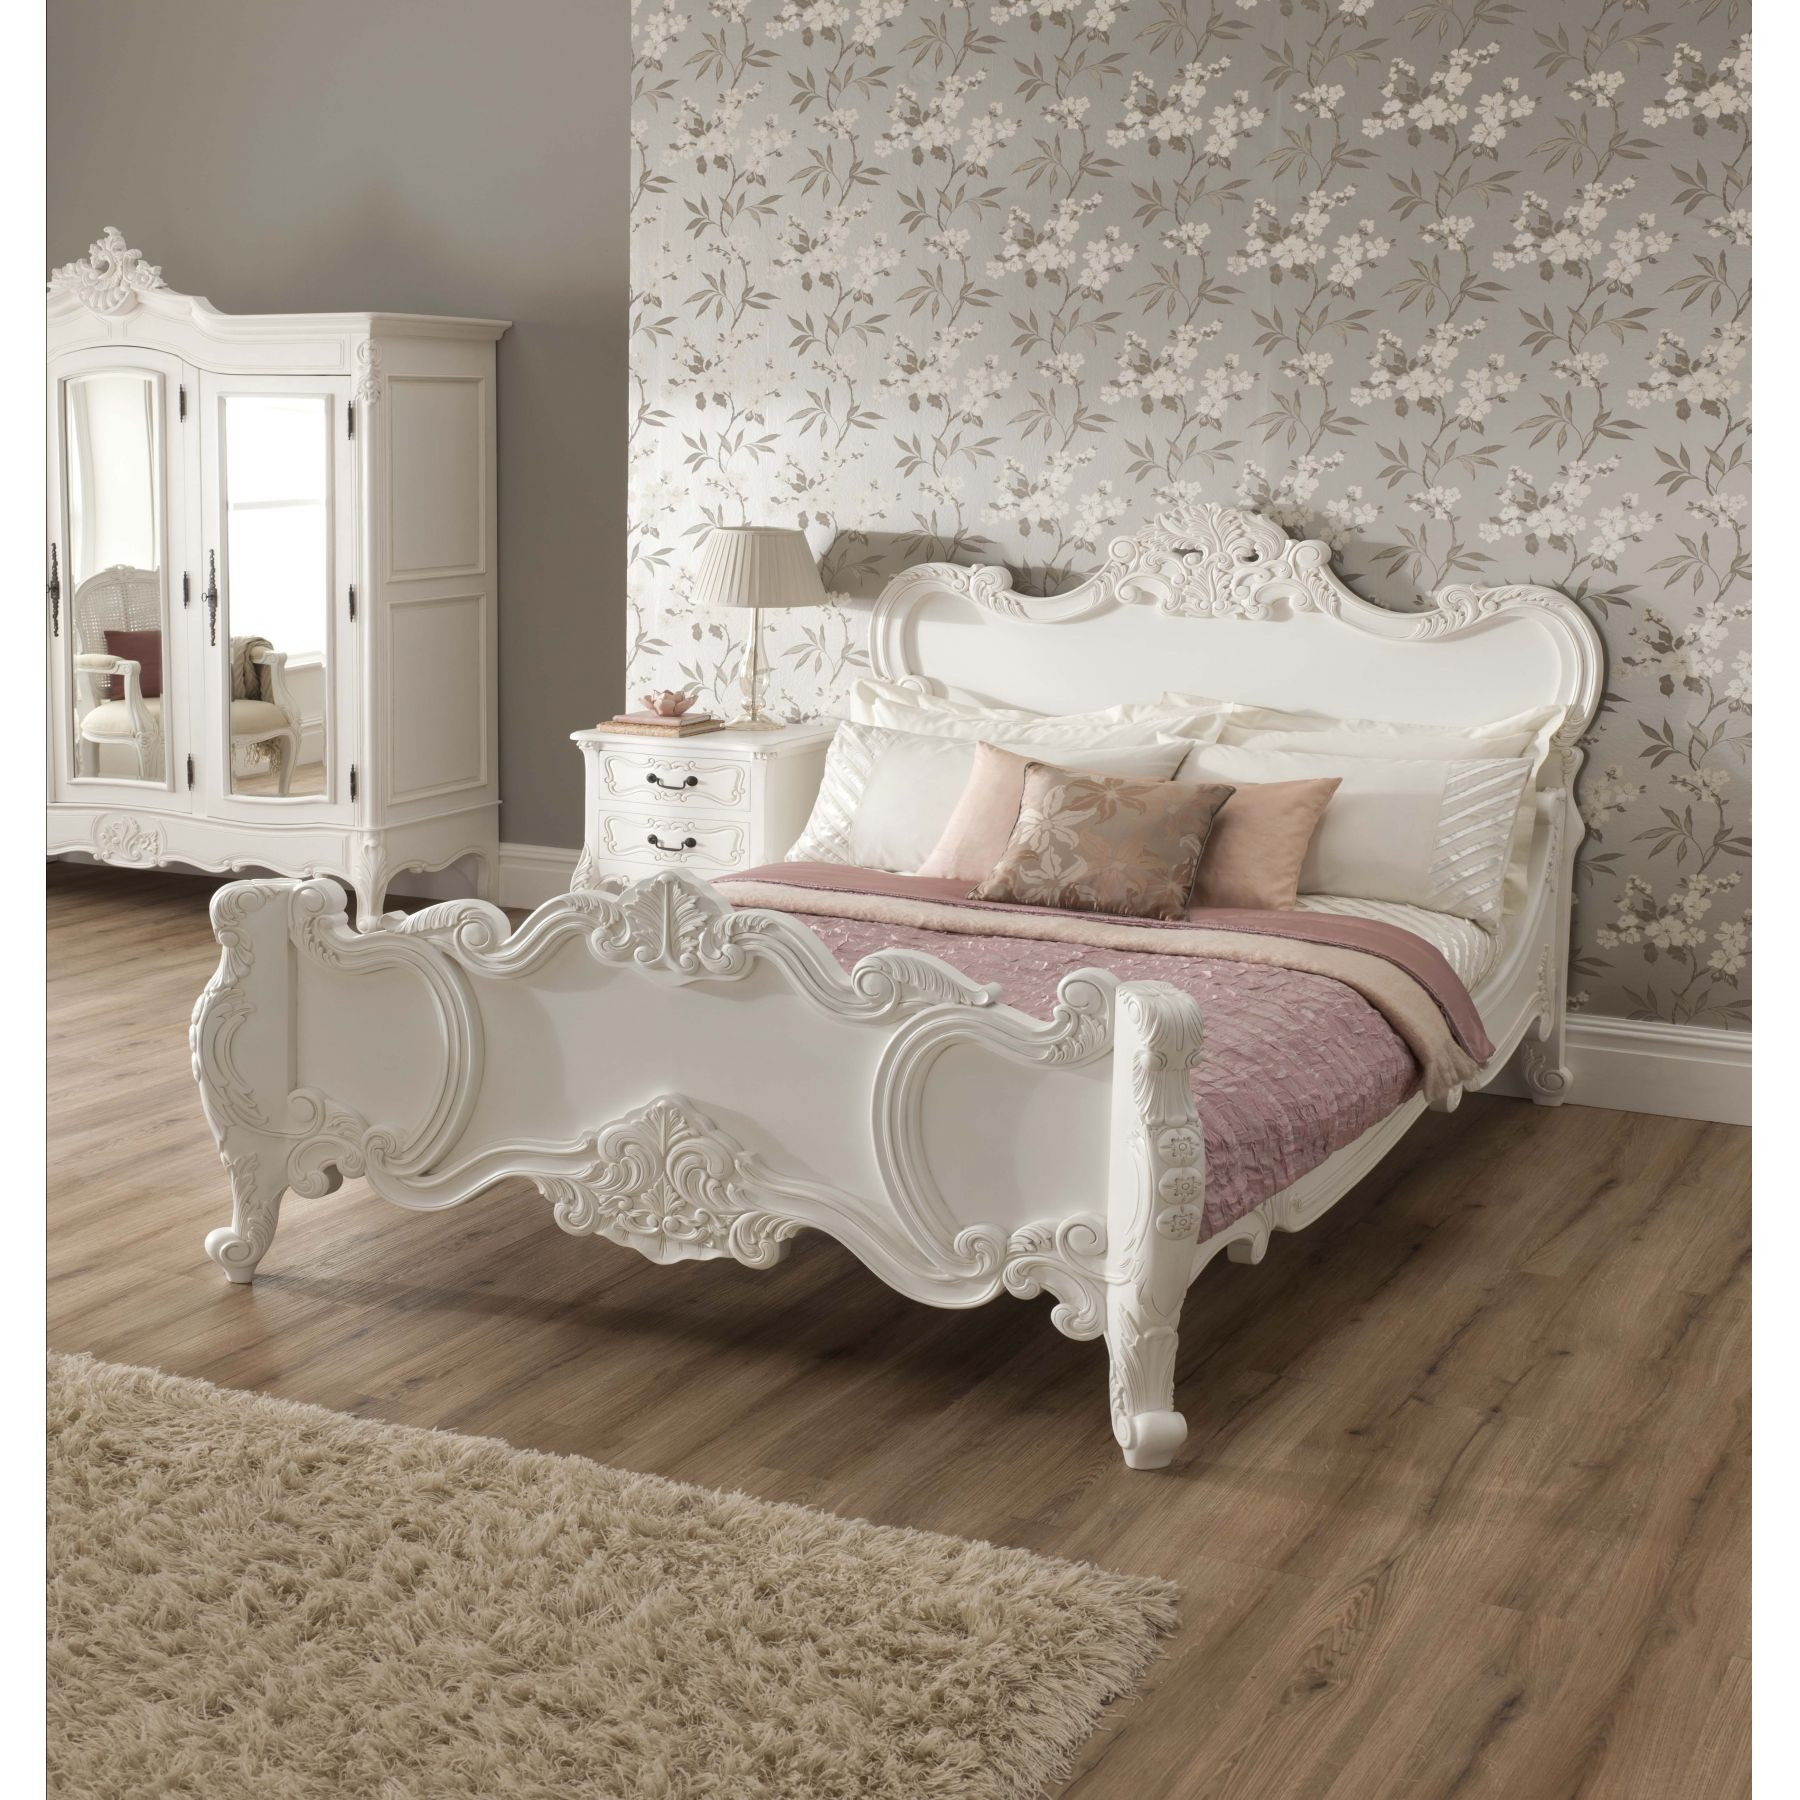 Shabby Chic Bedroom Furniture Sets Beautiful Vintage Your Room with 9 Shabby Chic Bedroom Furniture